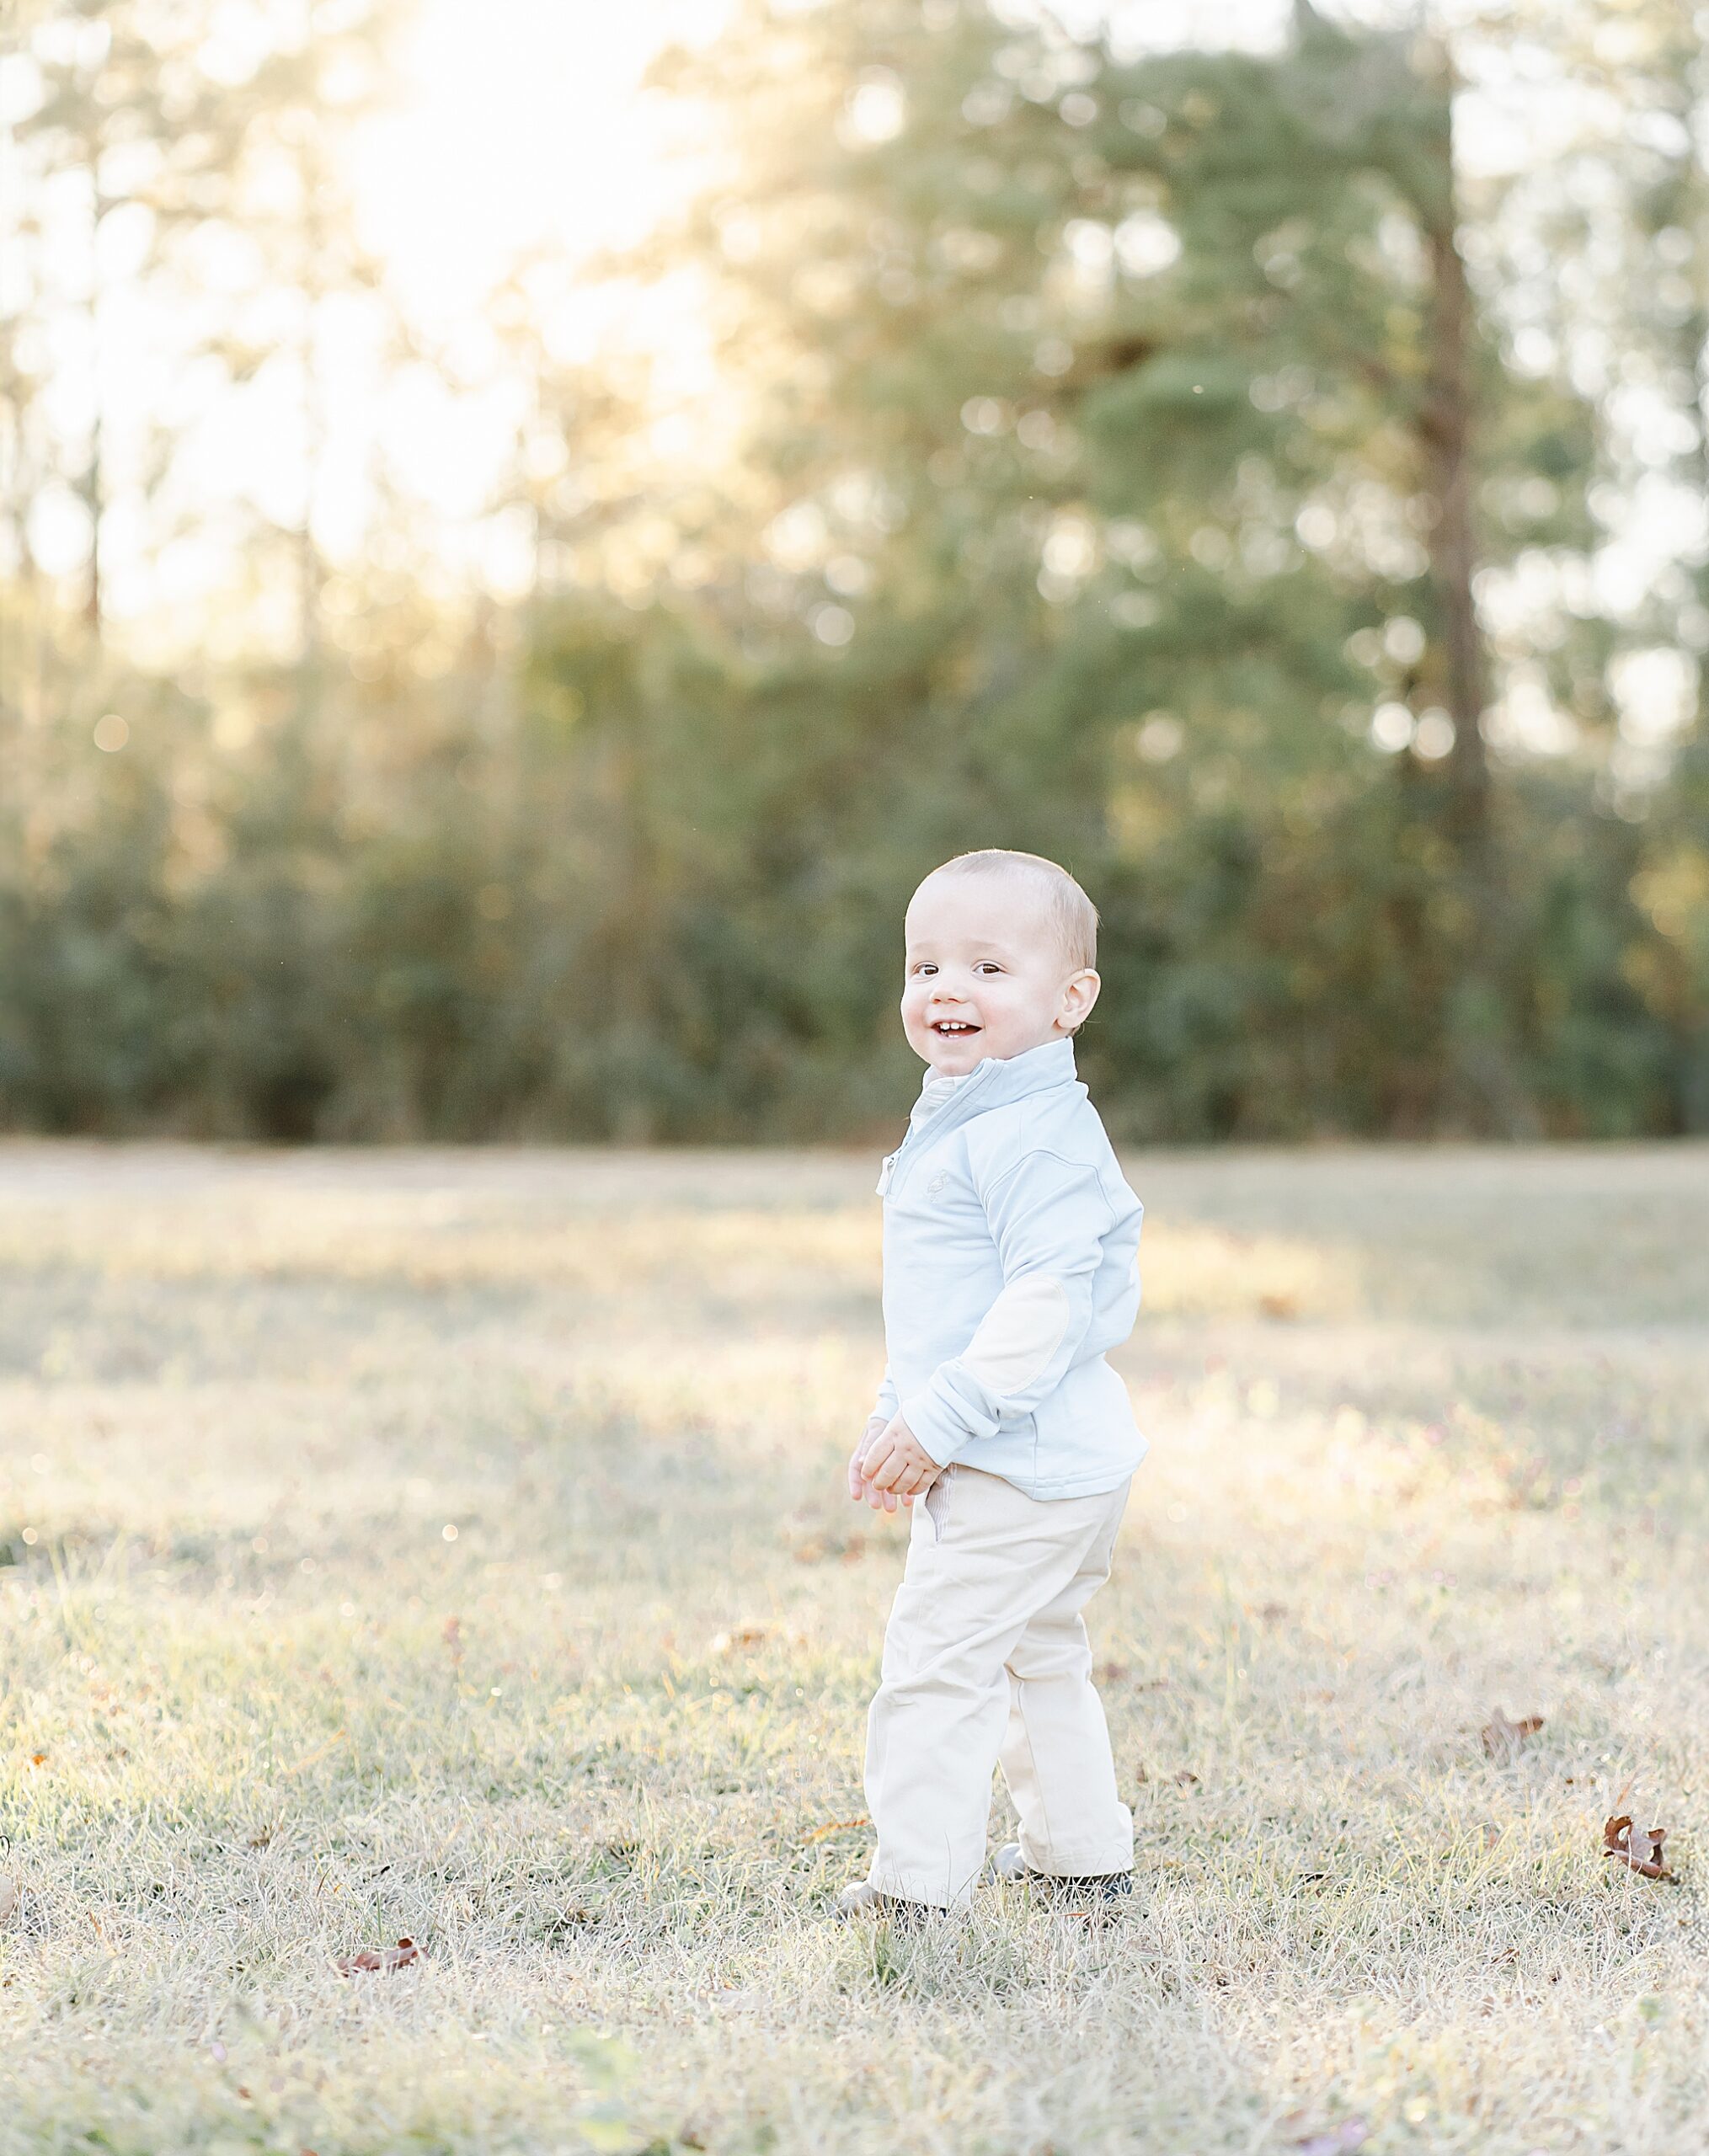 A one year old little boy stands and grins at the camera. Photo by Emily Lofton Photography.